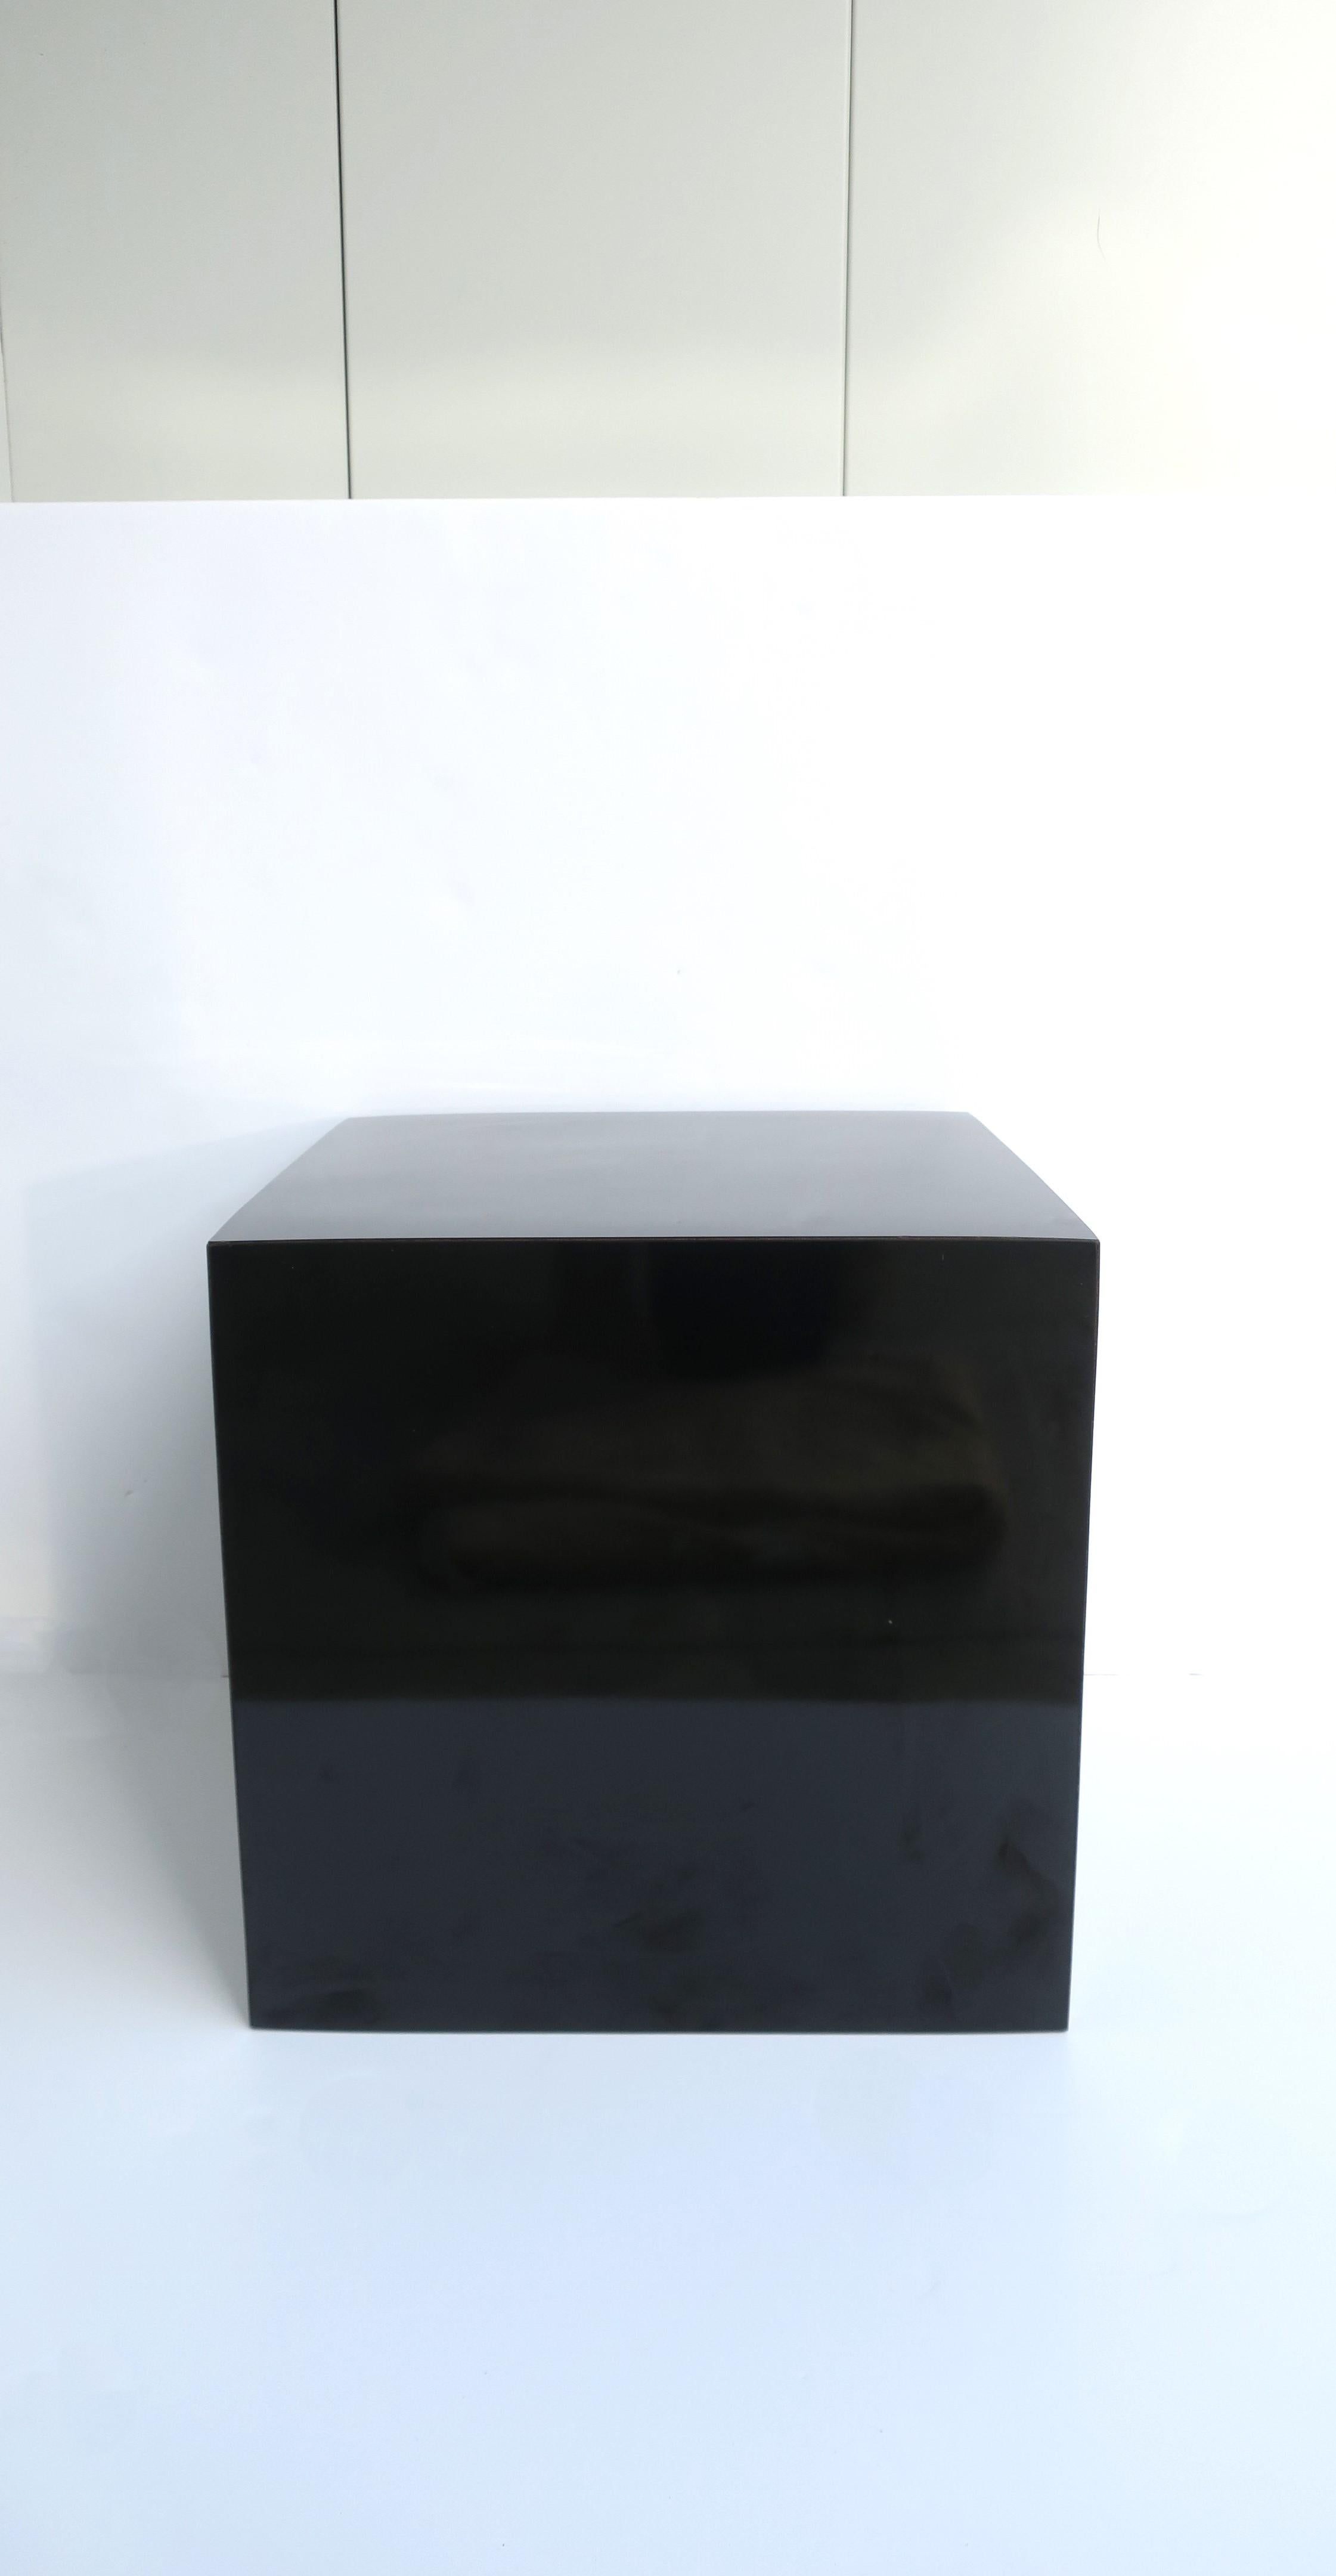 A black gloss laminate veneered pedestal or cube end table, '70s Modern/Postmodern period, circa late-20th century, 1970s or later. A great piece for sculpture, art, display, or as a pedestal cube end table, nightstand table, etc., as demonstrated.